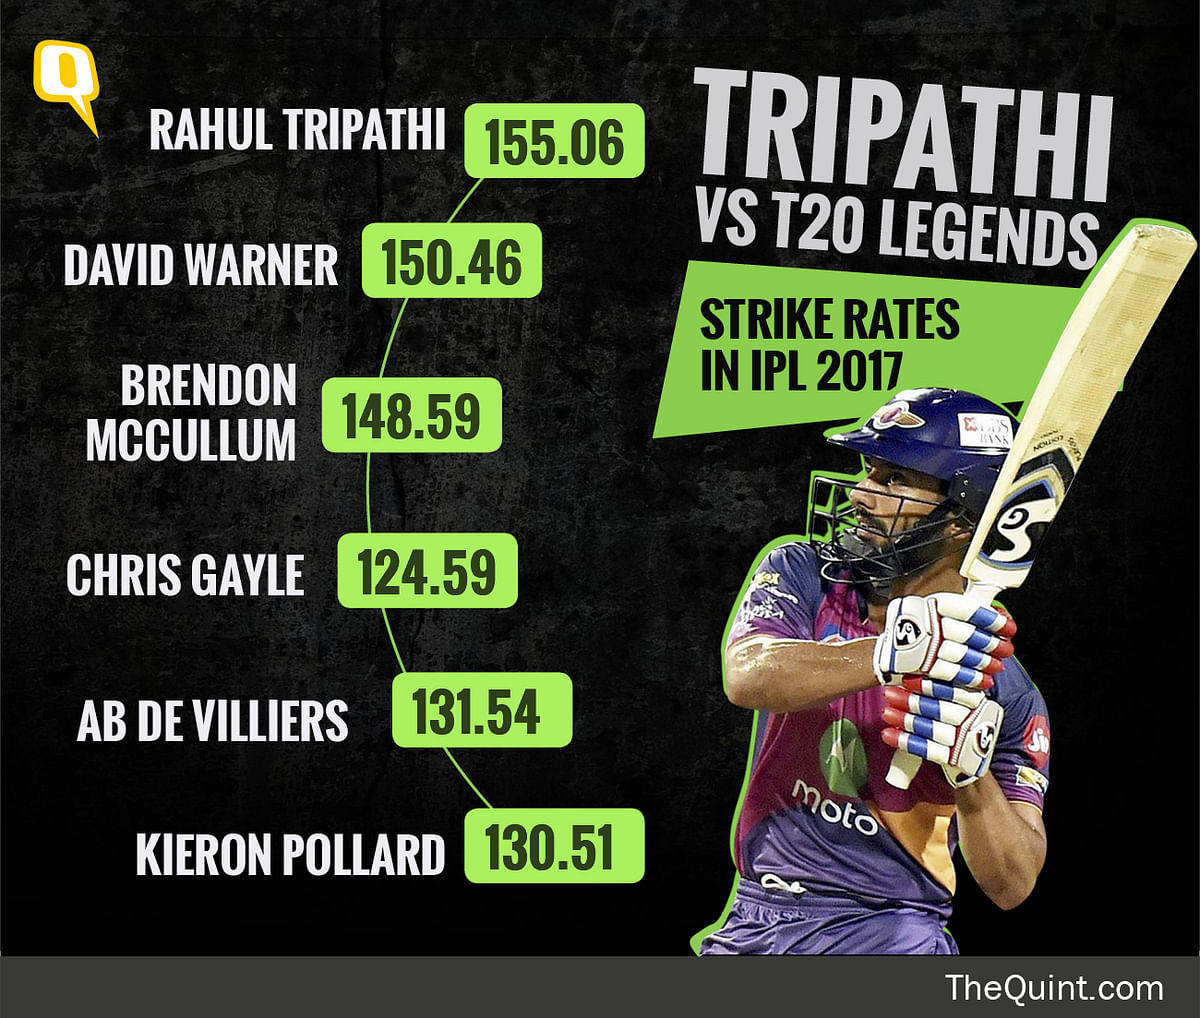 While Dhoni has been troubled by spin this IPL, there’s also the rise of Rahul Tripathi & Willliamson’s reinvention.